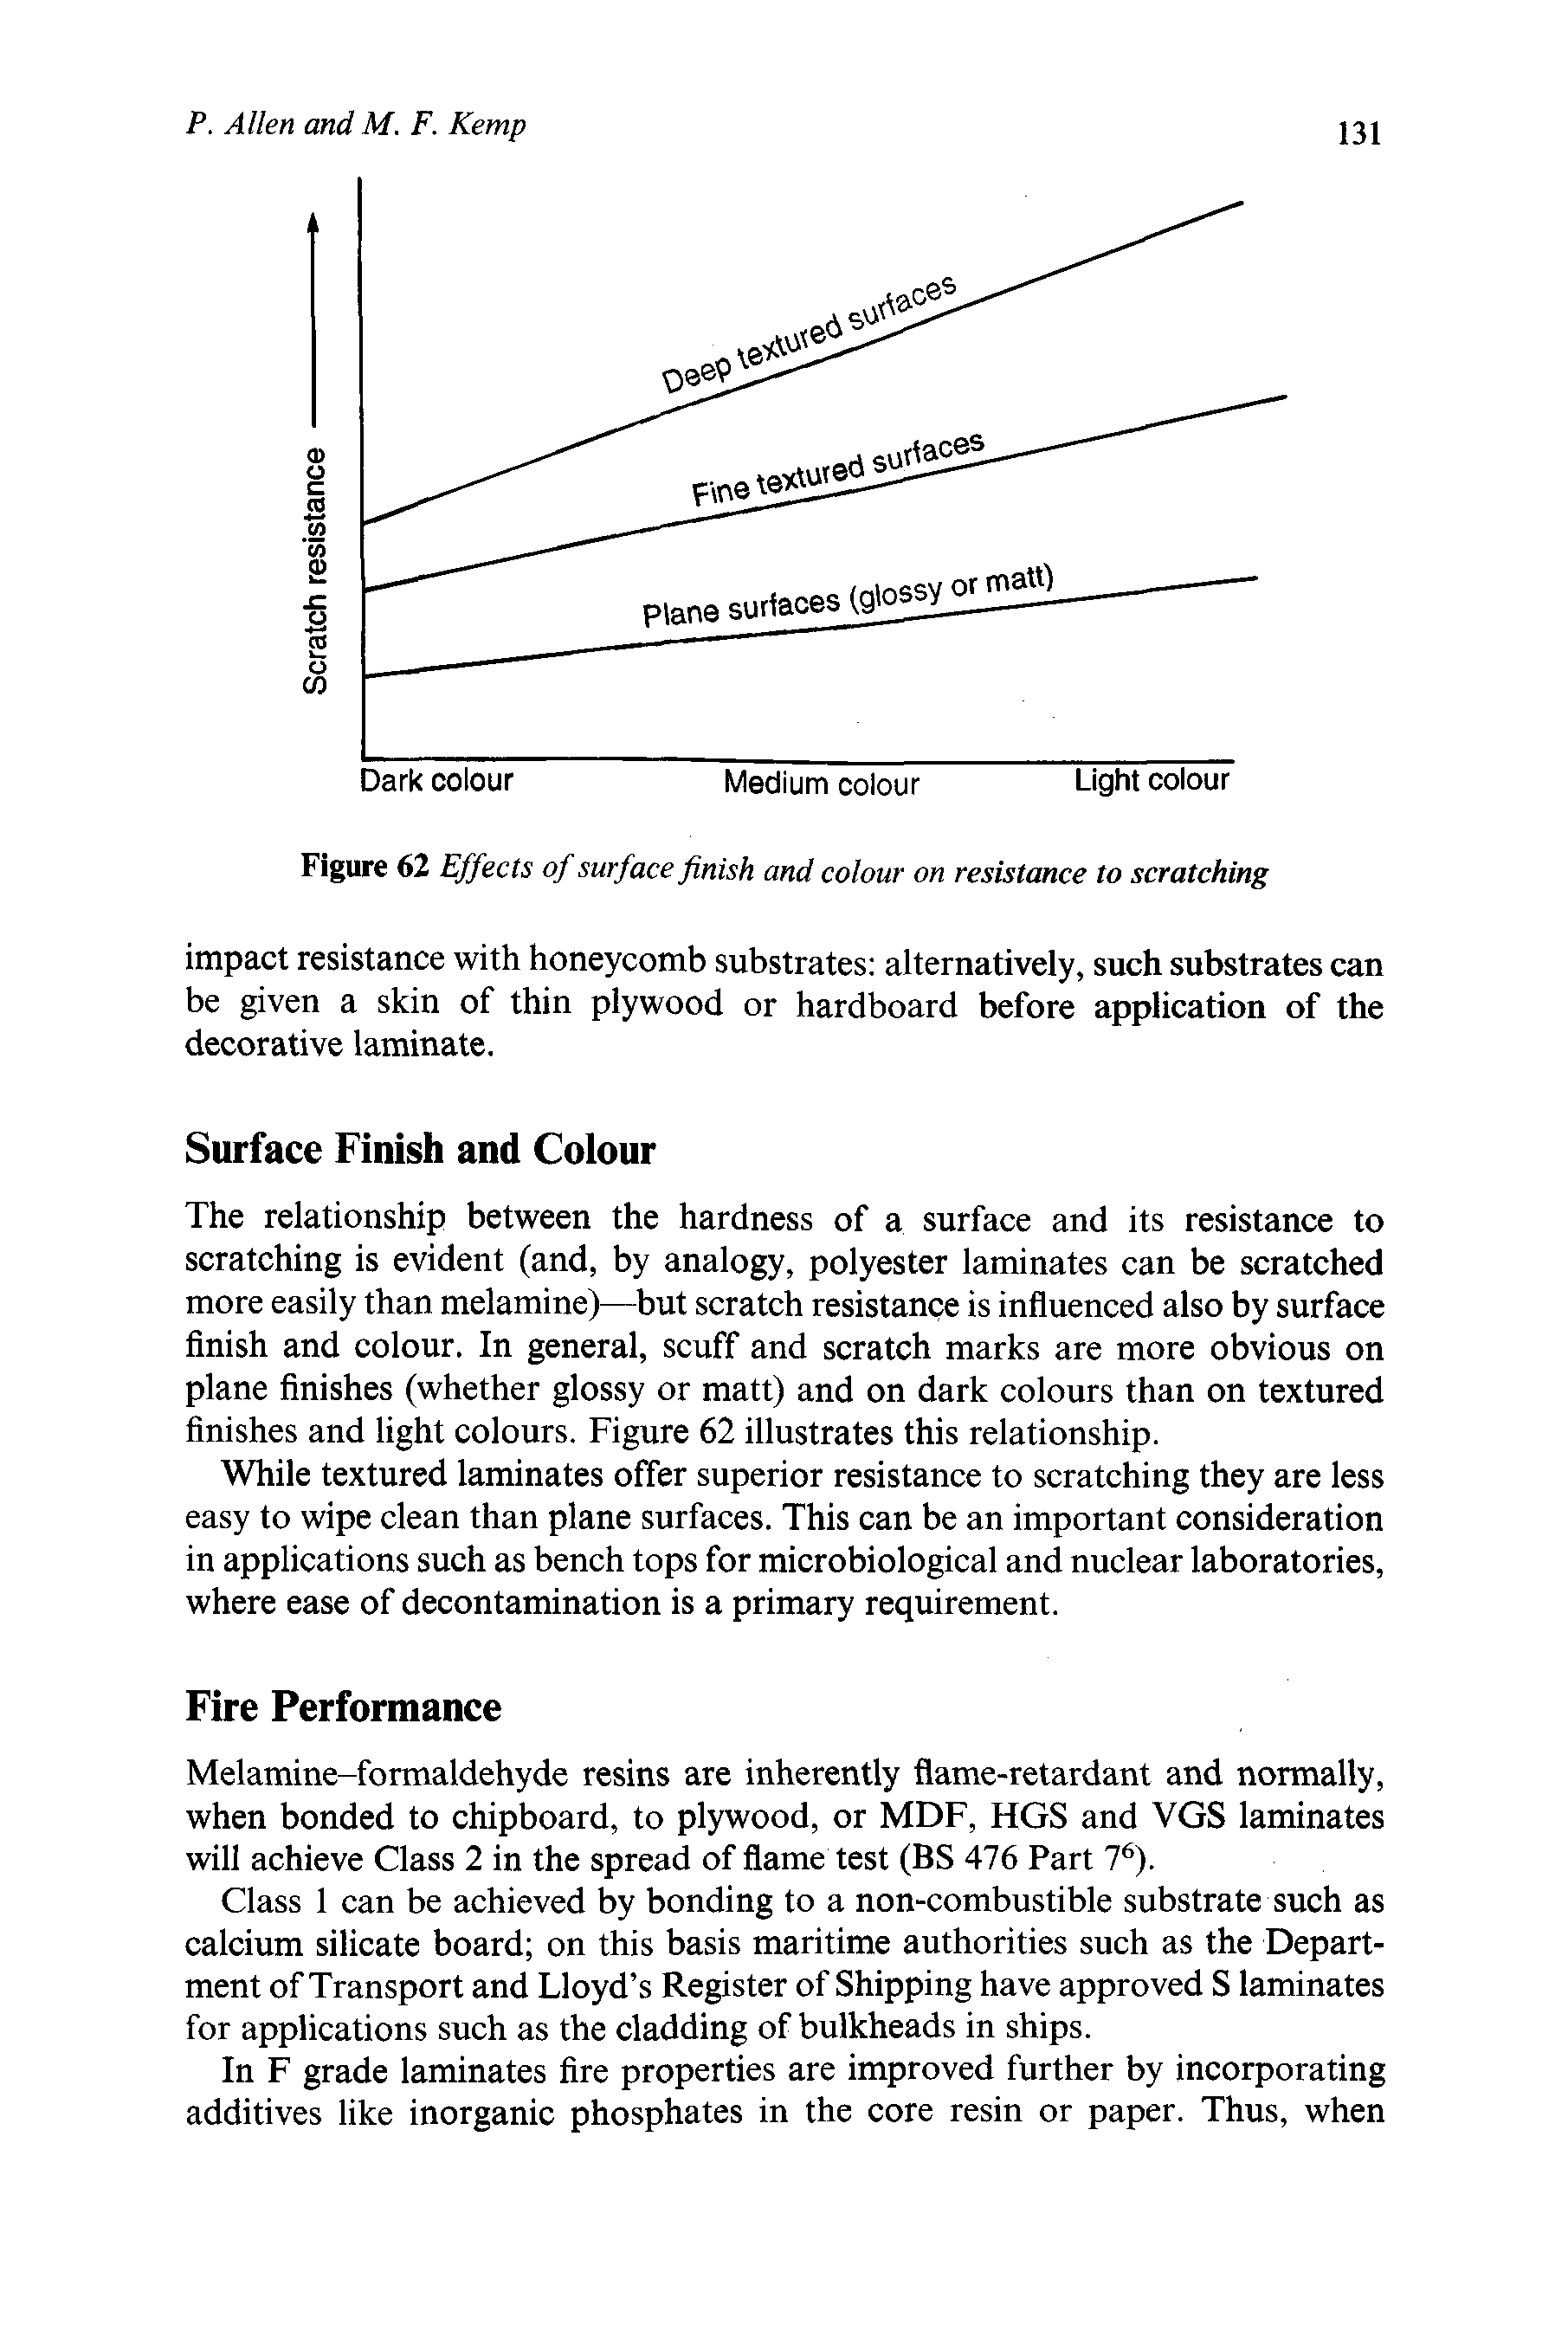 Figure 62 Effects of surface finish and colour on resistance to scratching...